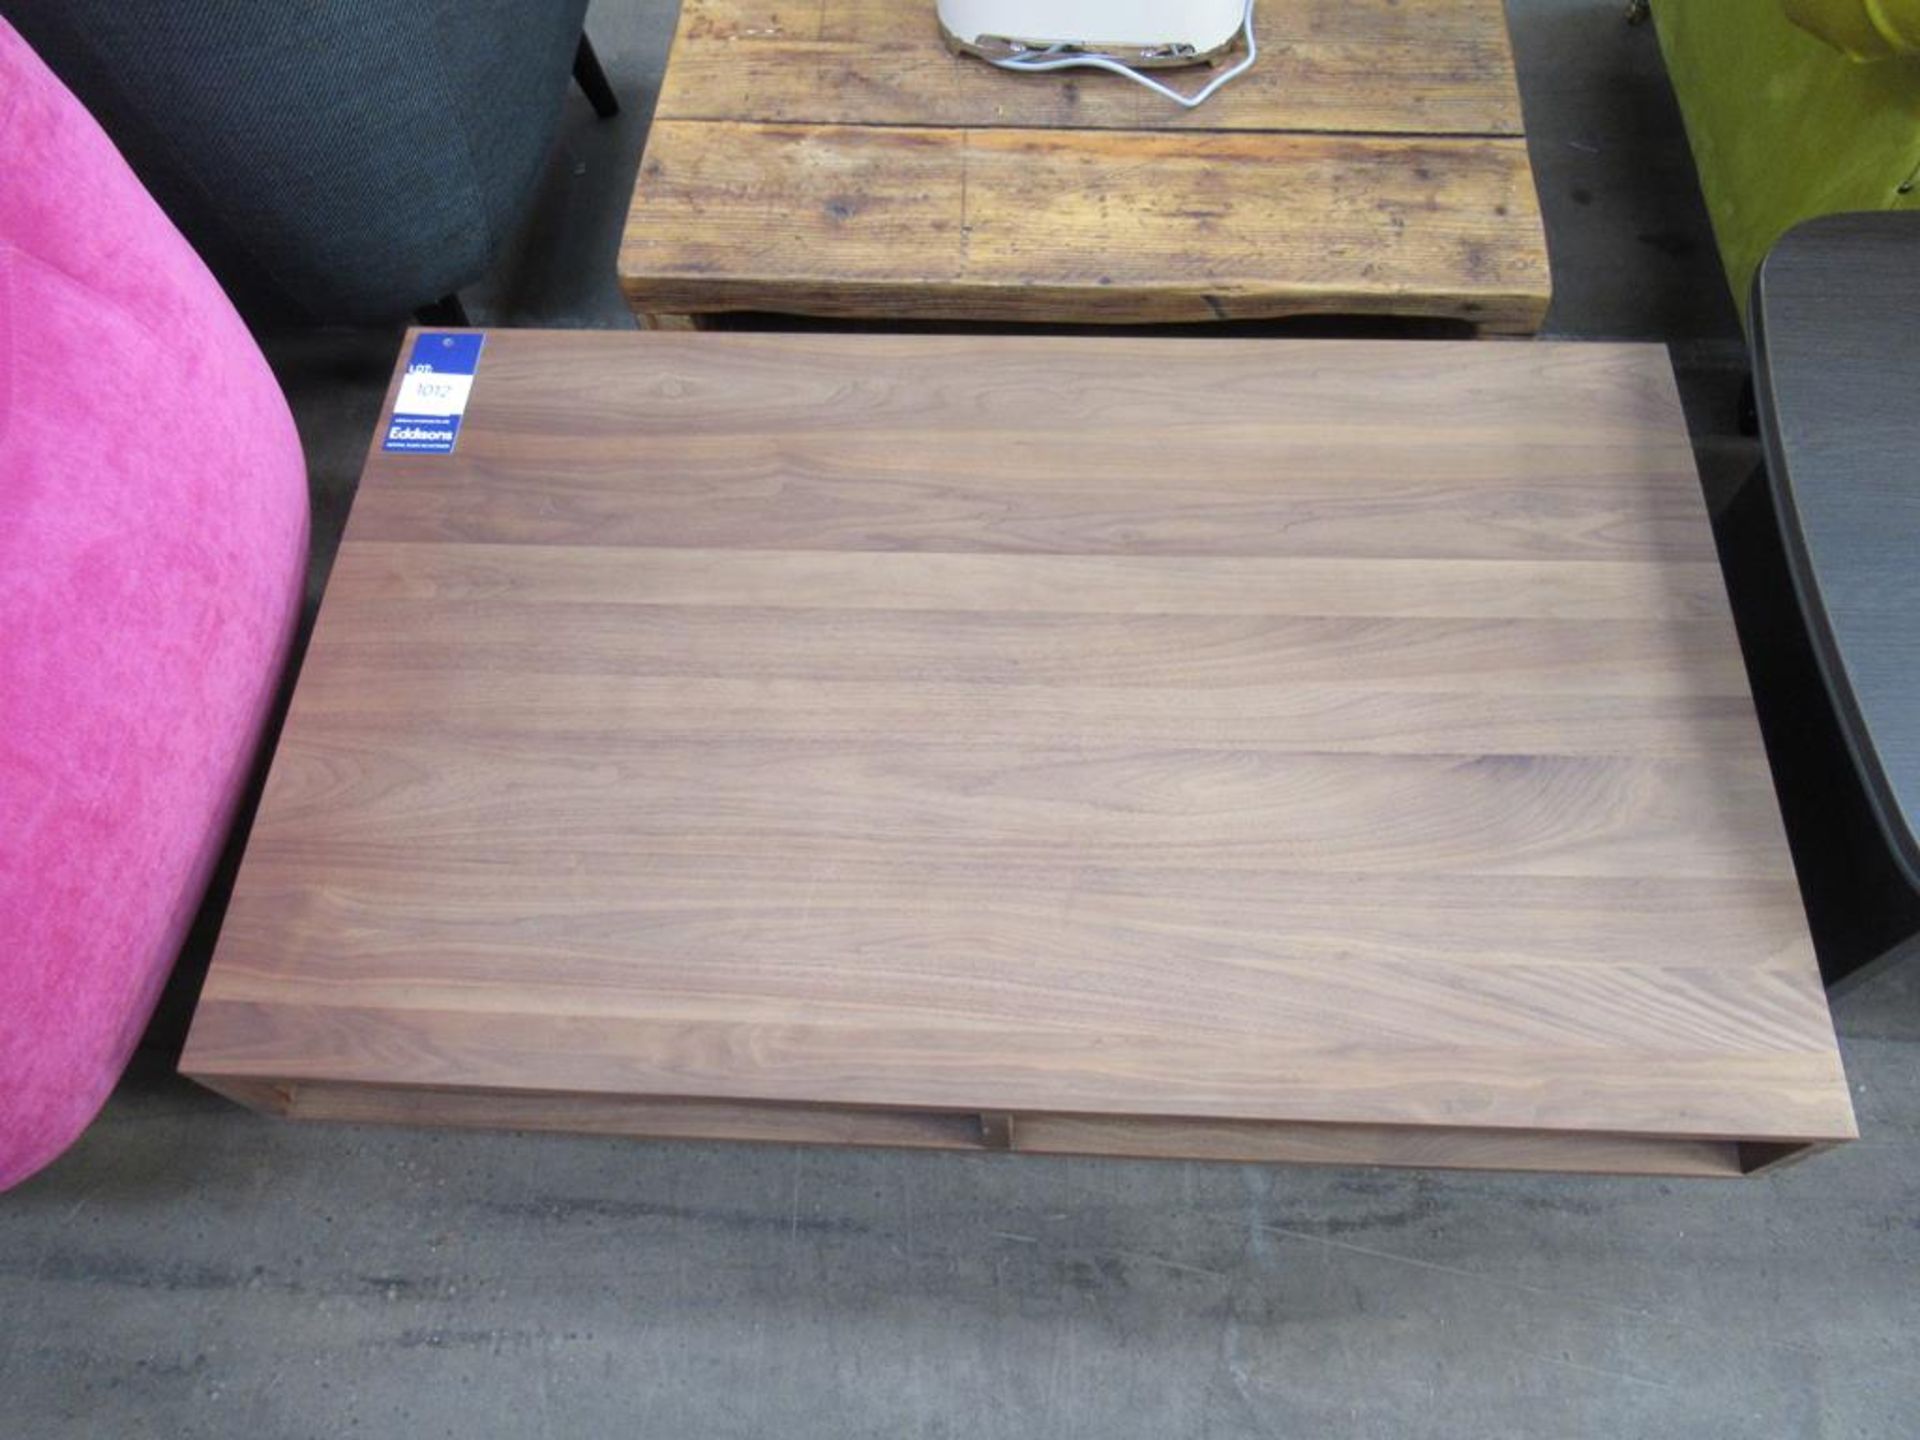 Two Tier Divided Coffee Table. - Image 2 of 2